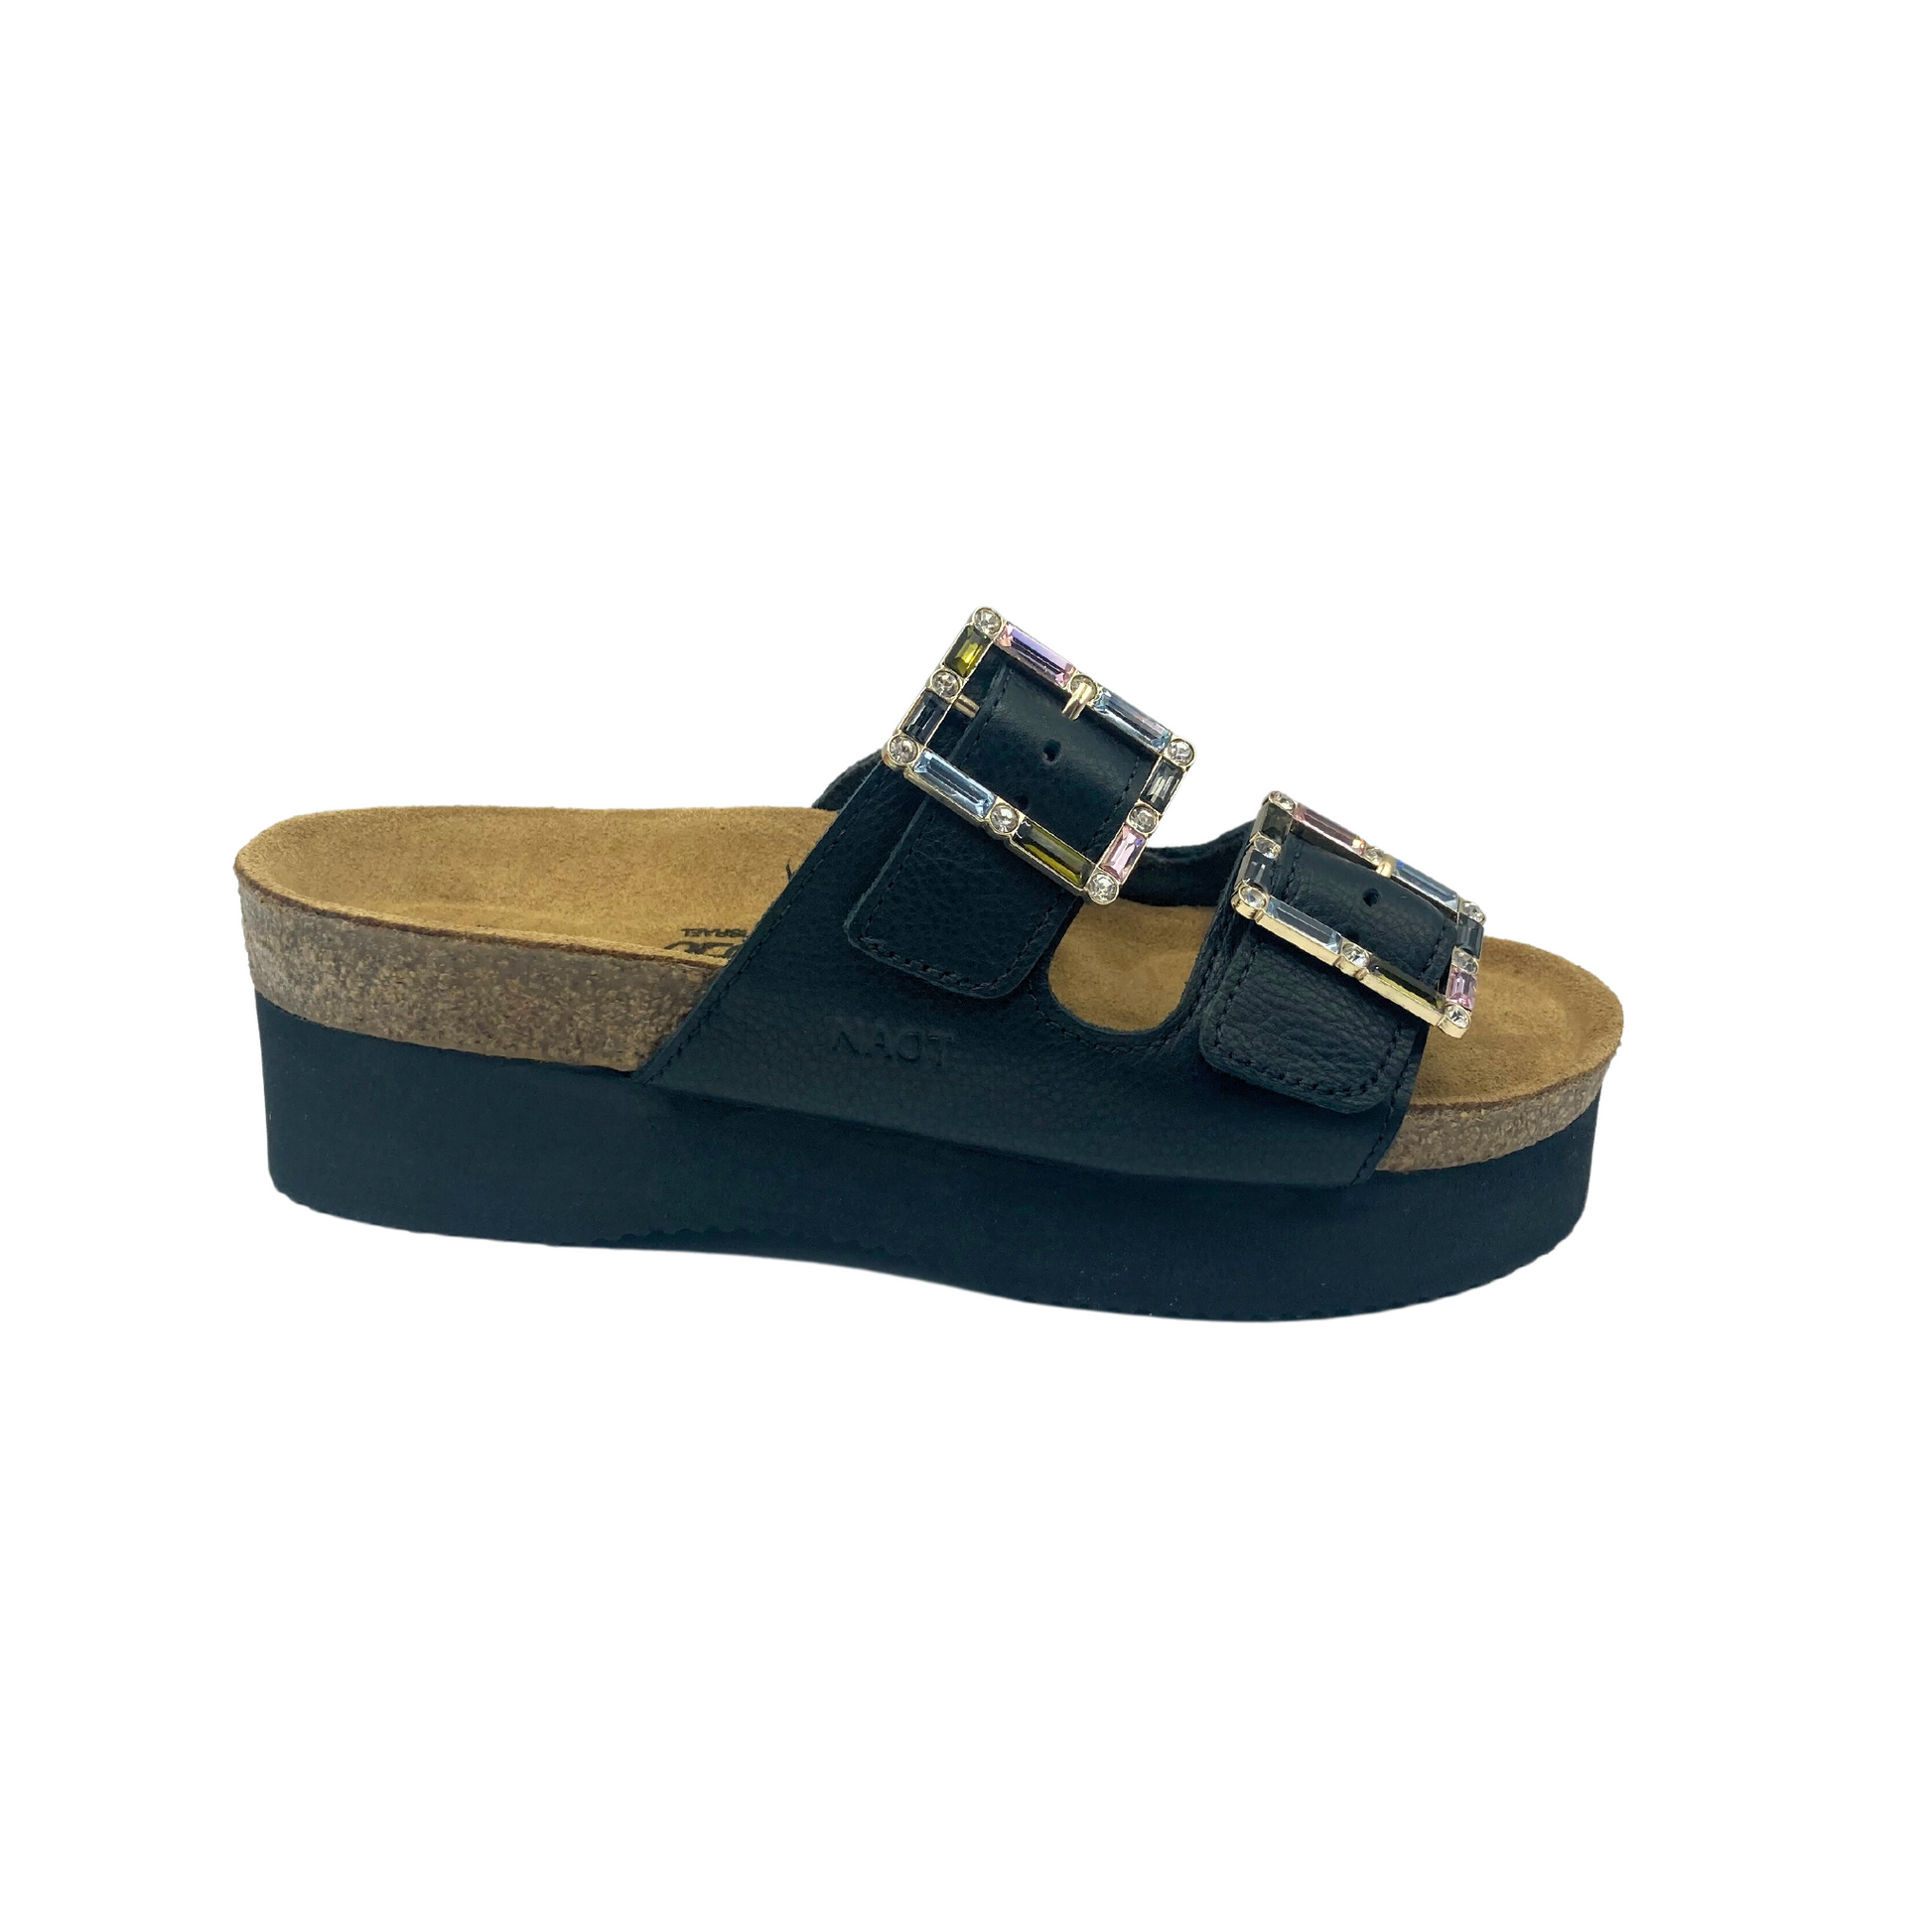 Outside view of a black leather platform sandal.  Anatomic footbed is made from cork and latex.  Two wide straps across foot both with buckle adjustment